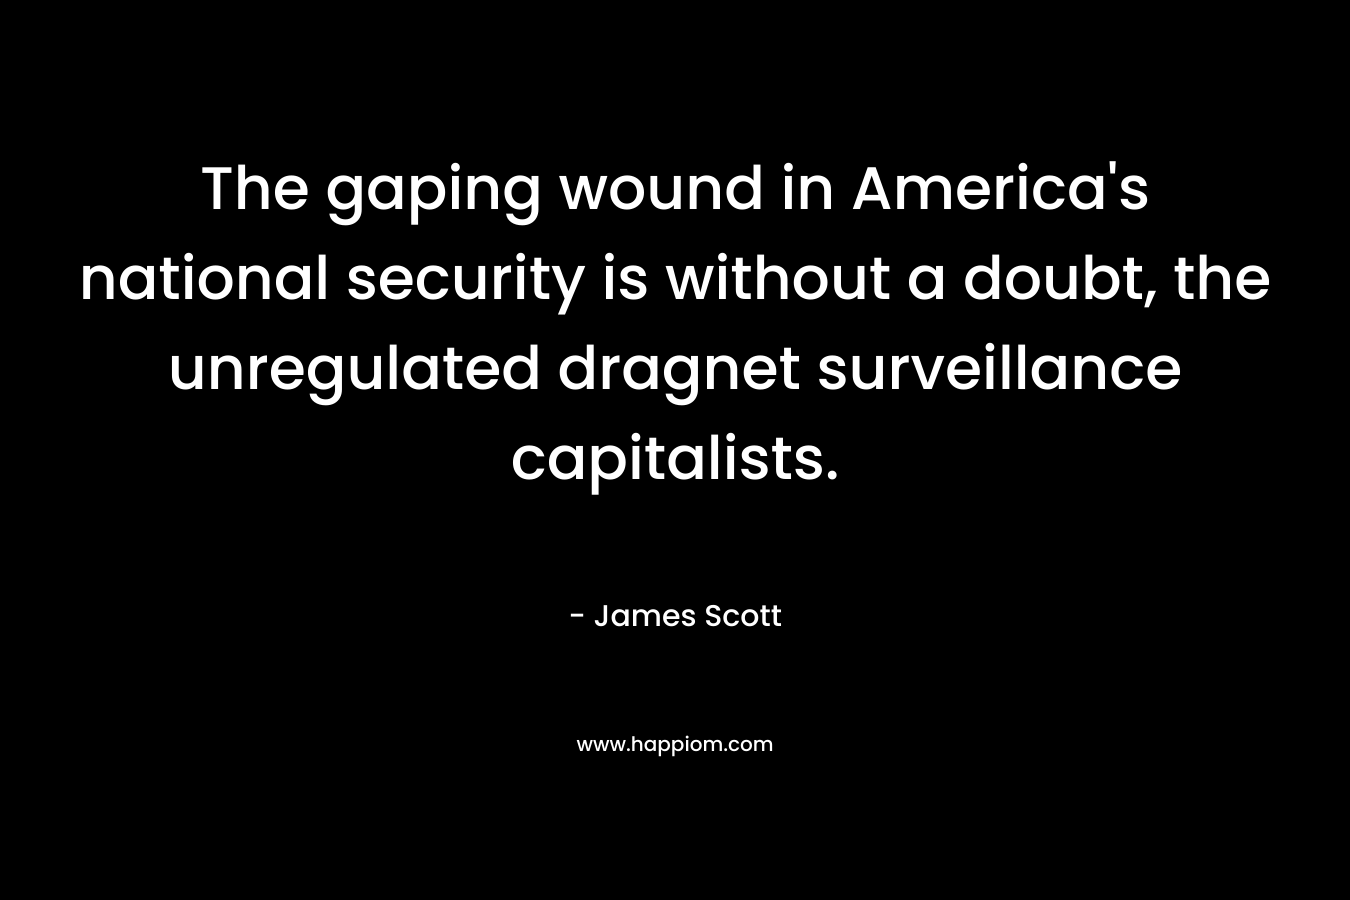 The gaping wound in America’s national security is without a doubt, the unregulated dragnet surveillance capitalists. – James Scott